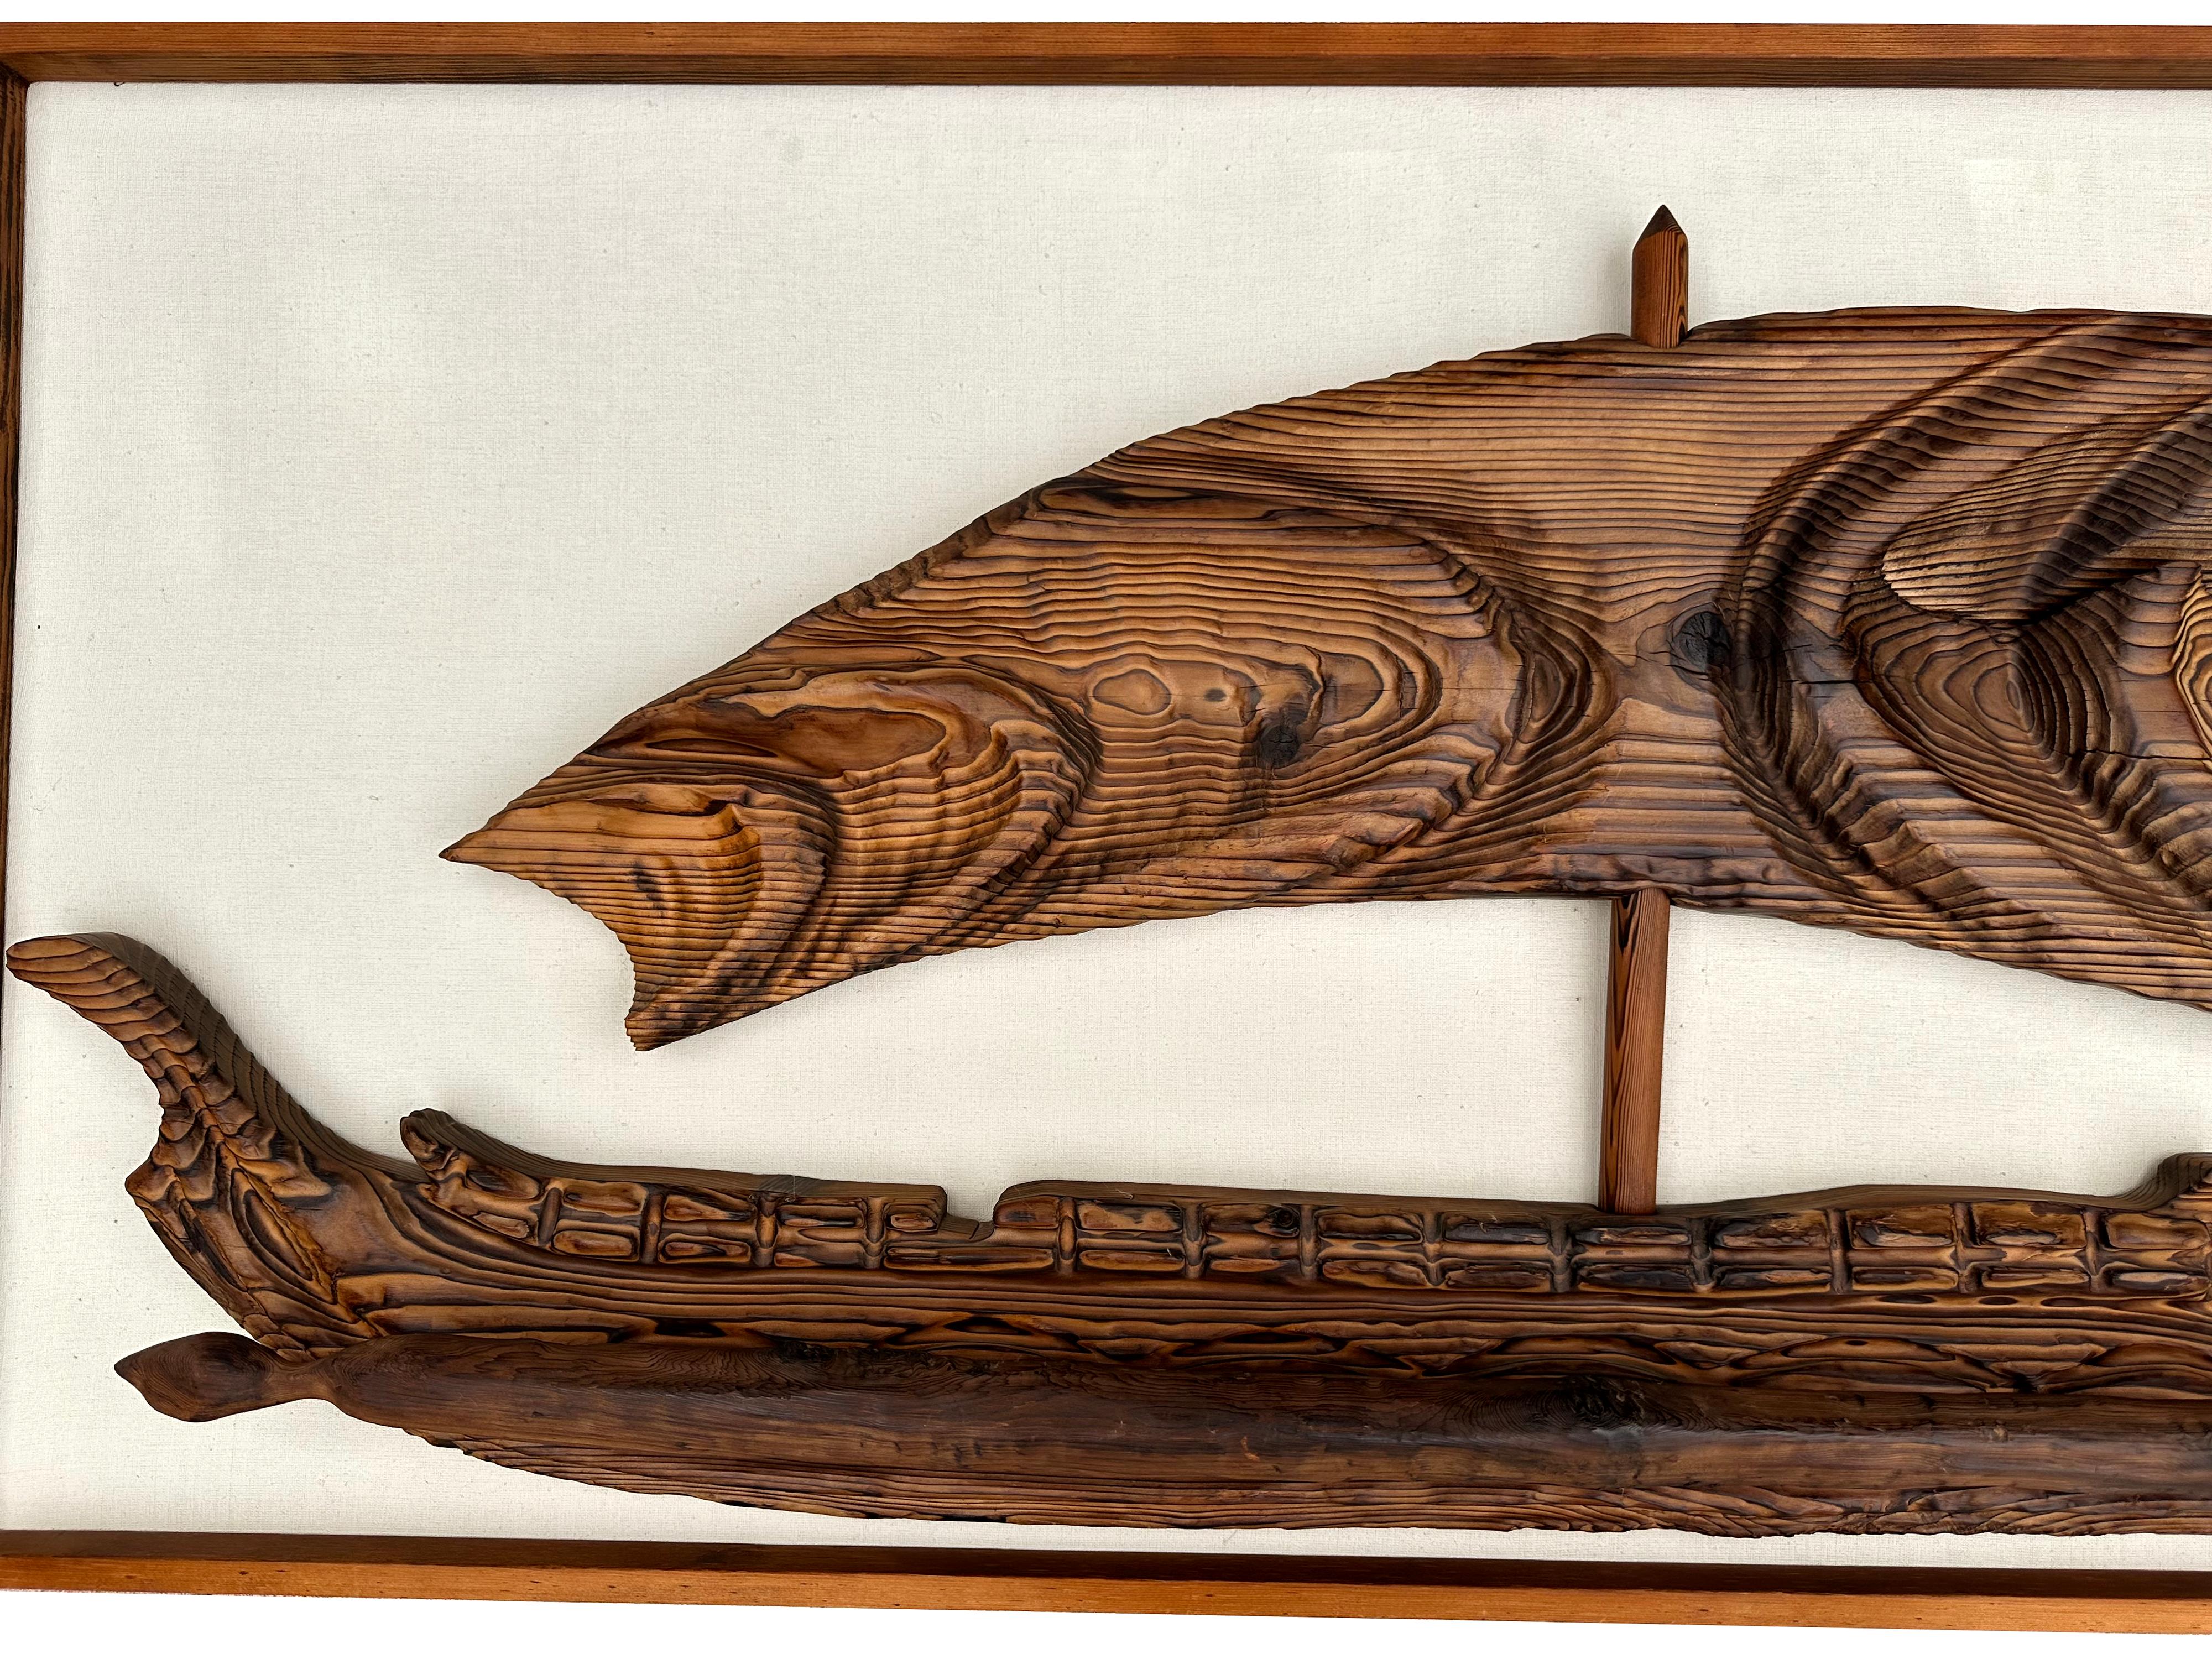 Vintage Hawaiian outrigger carved Witco wall hanging.  Large statement piece with outrigger float extending out.  Good vintage condition, off white background looks as though it was freshened up and repainted at some point. This artwork would look